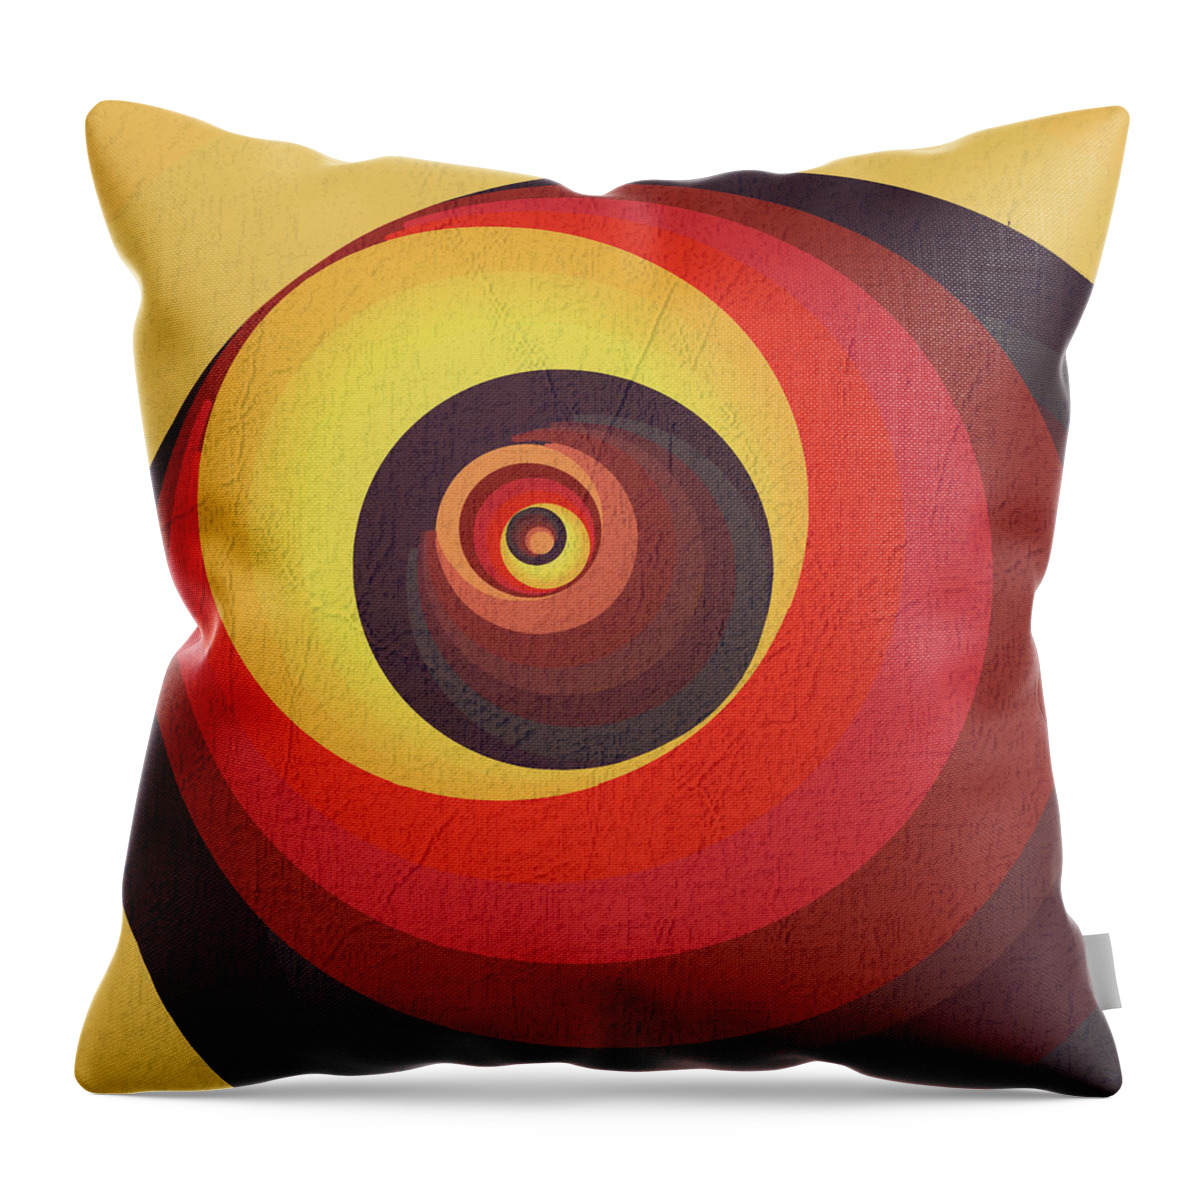 Multicolor Throw Pillow featuring the digital art Flame Meditation on a Yellow Wall by Deborah Smith